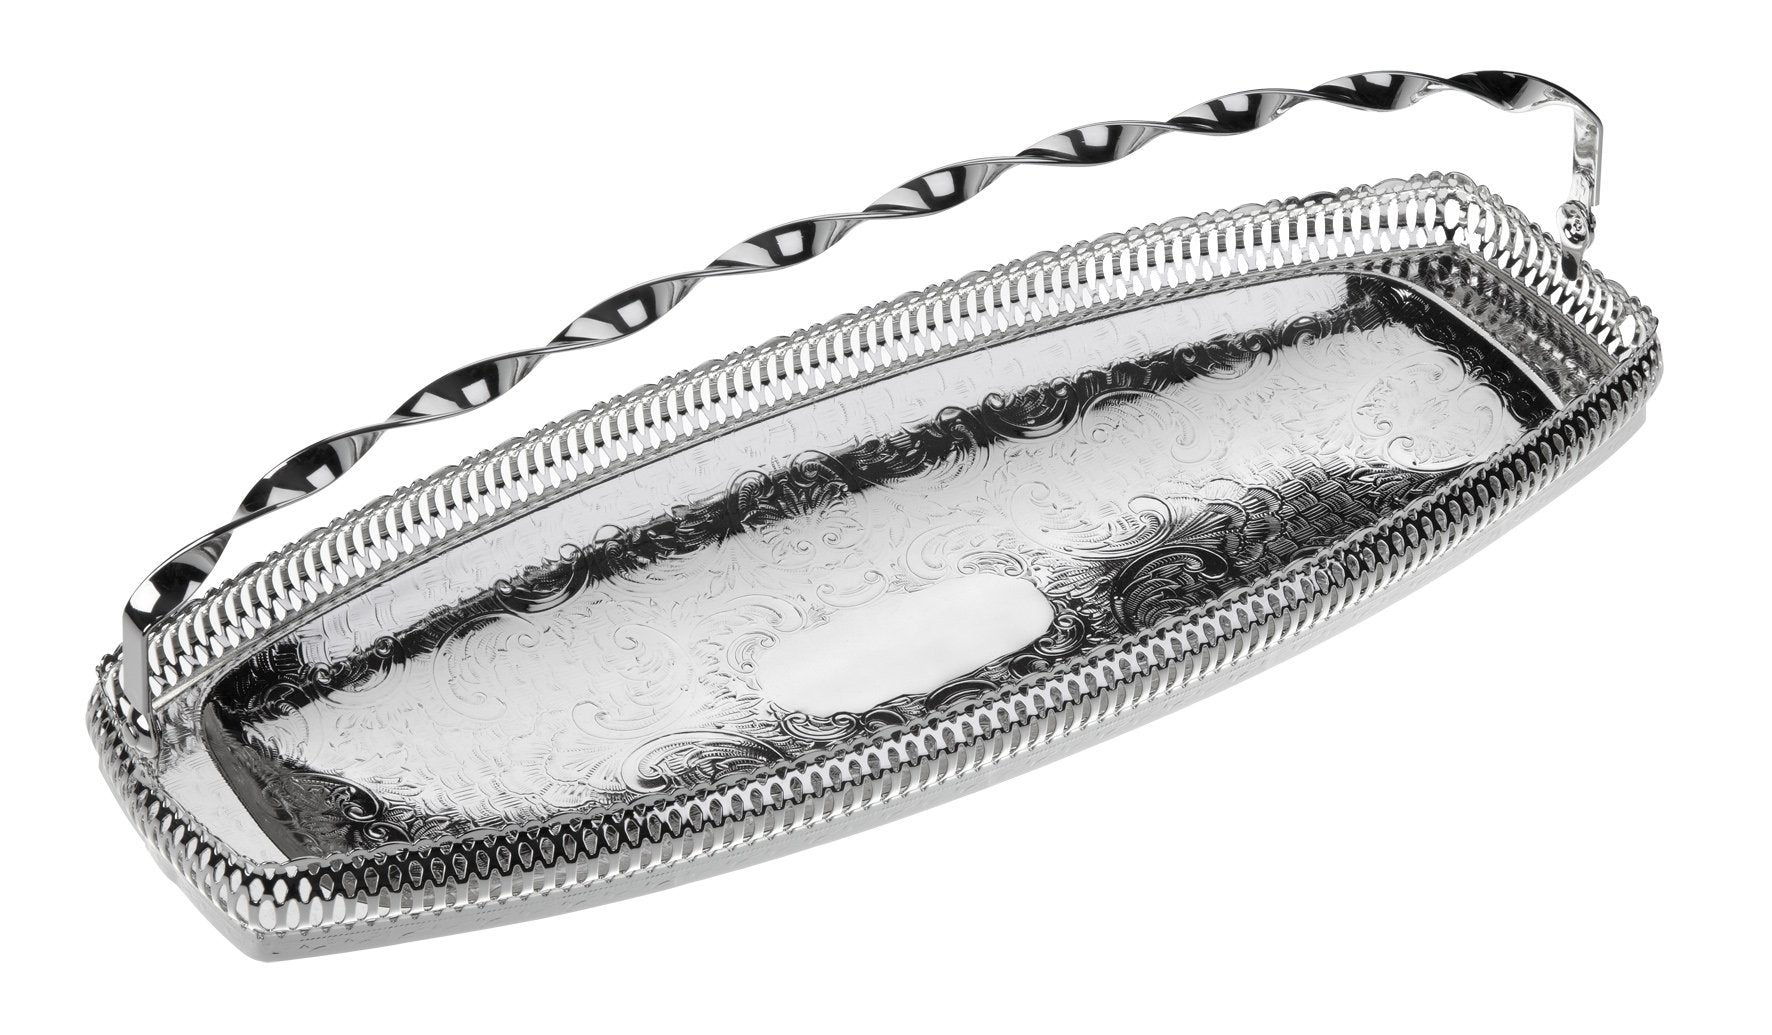 Queen Anne - Cookies Tray with Swing Handle - Silver Plated Metal - 40x15cm - 26000257